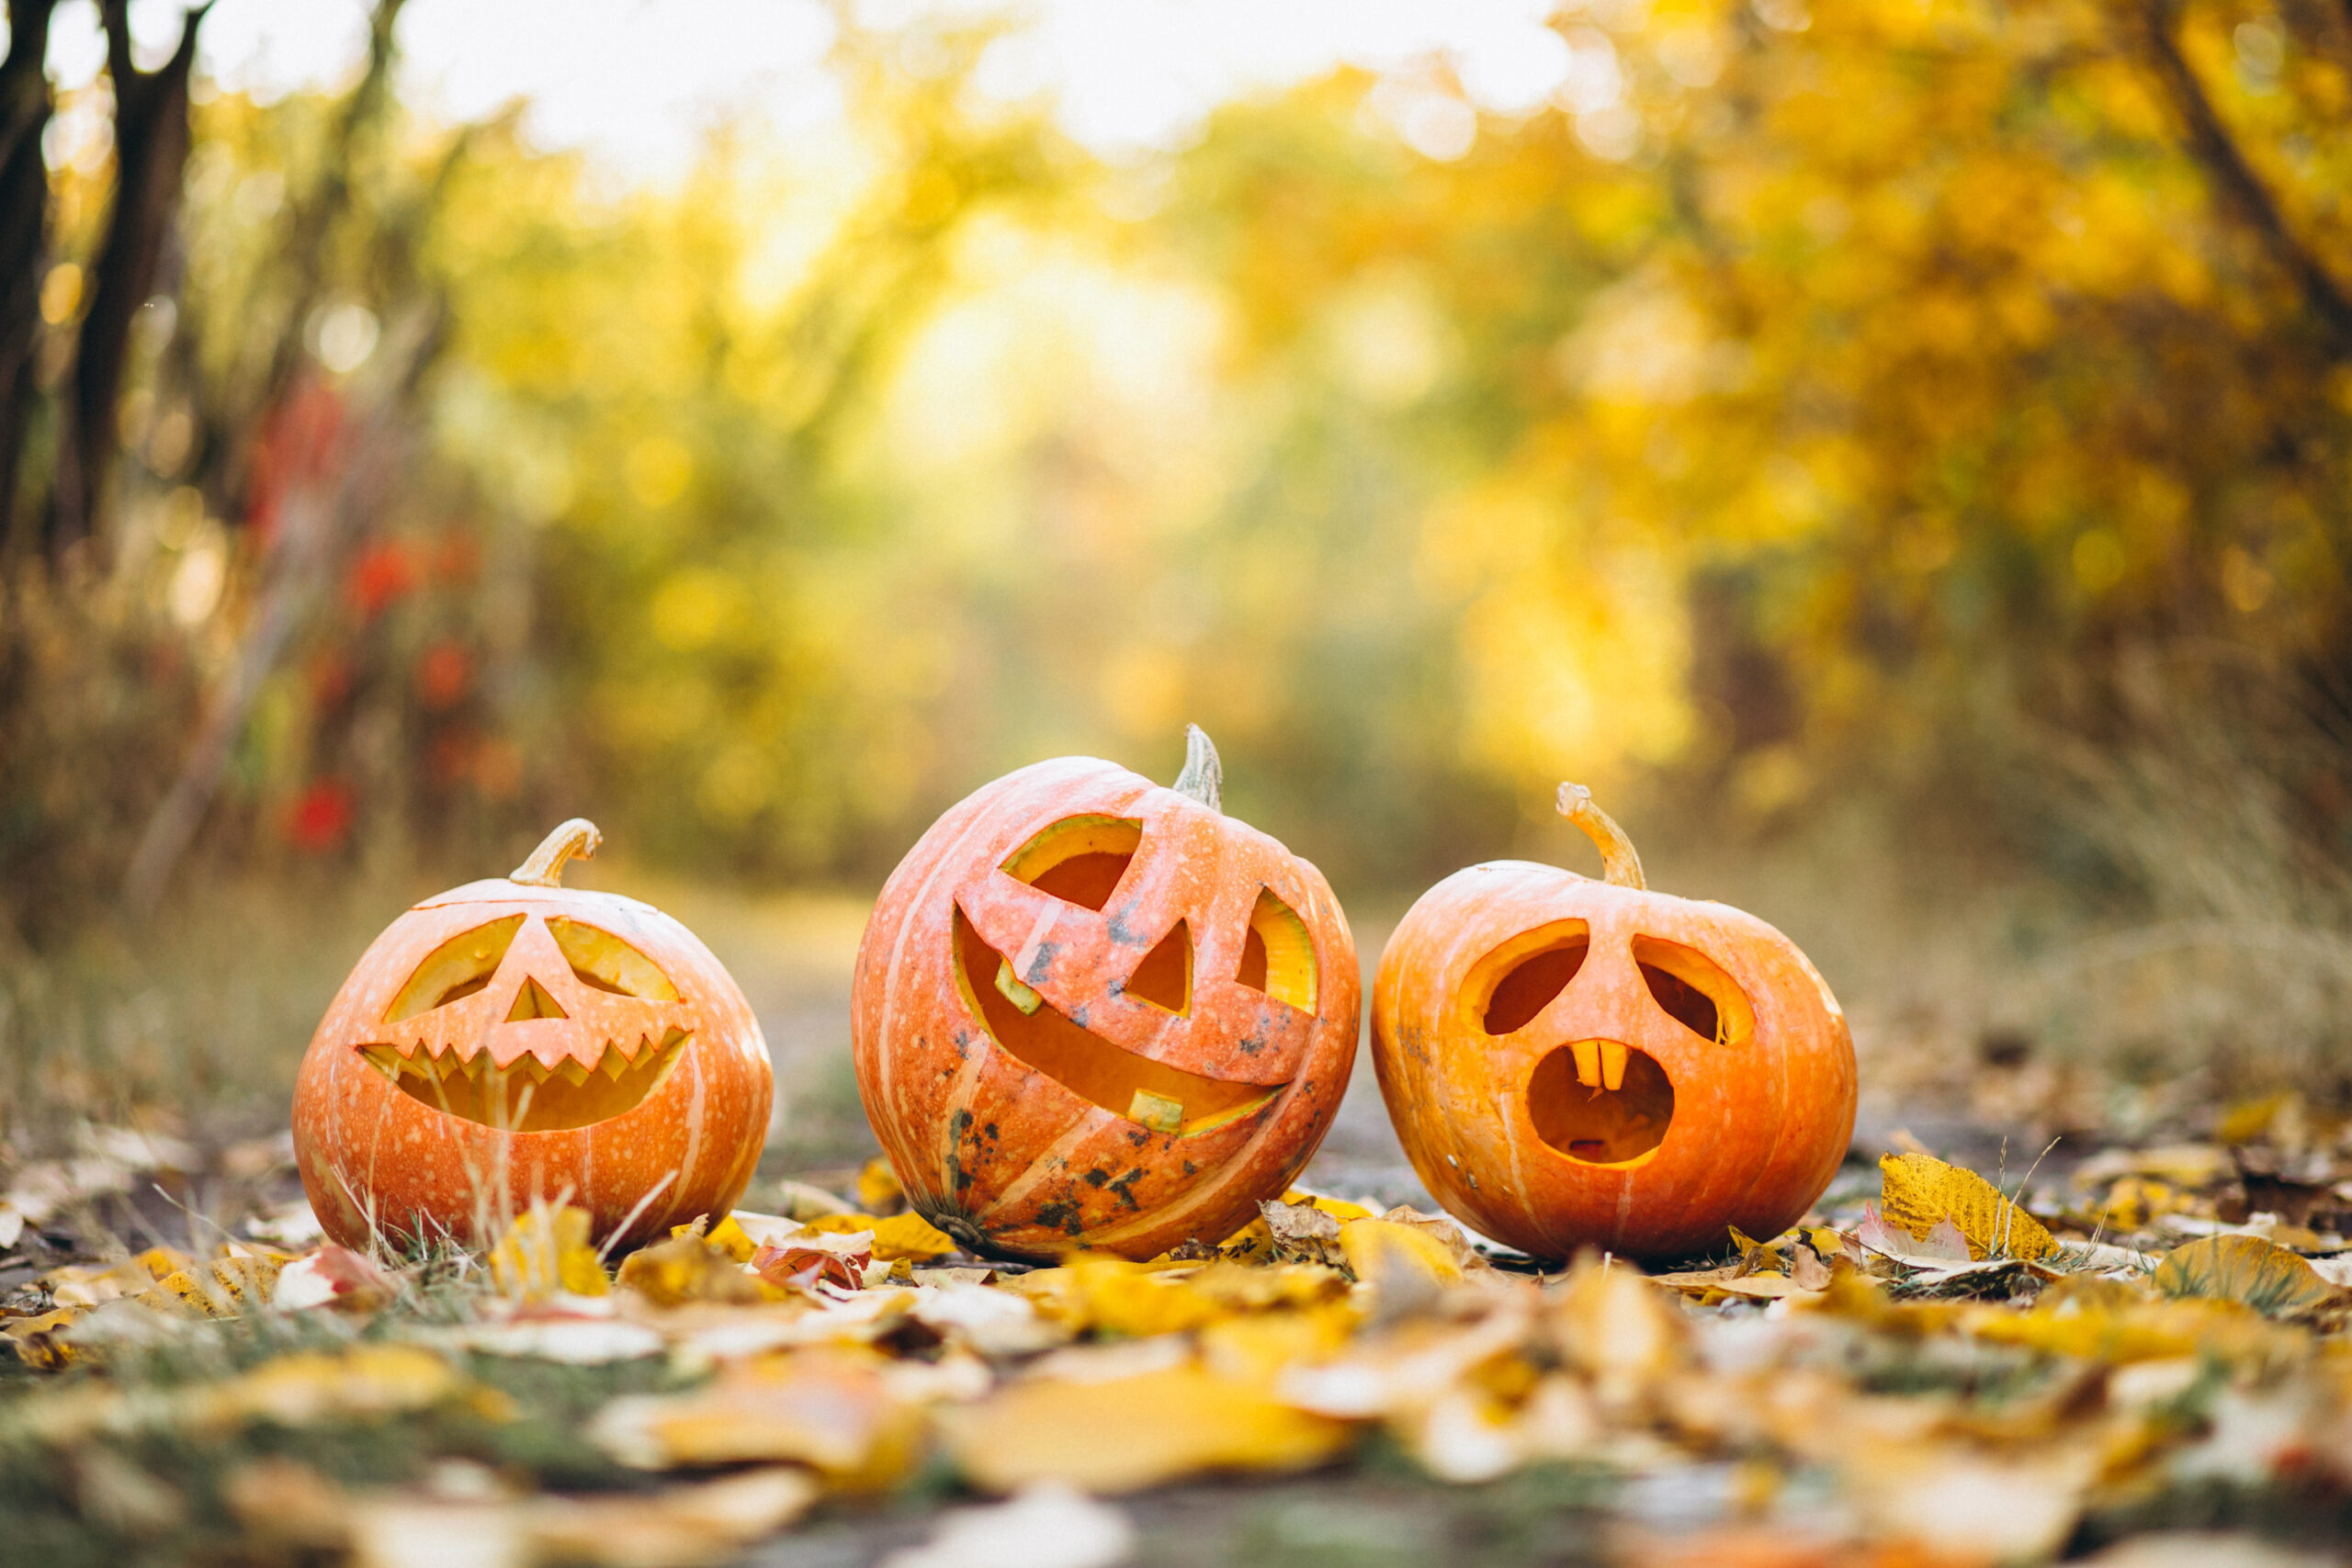 Sustainable Pumpkin Disposal Tips + Tricks for the ‘Spooky’ Holiday Season